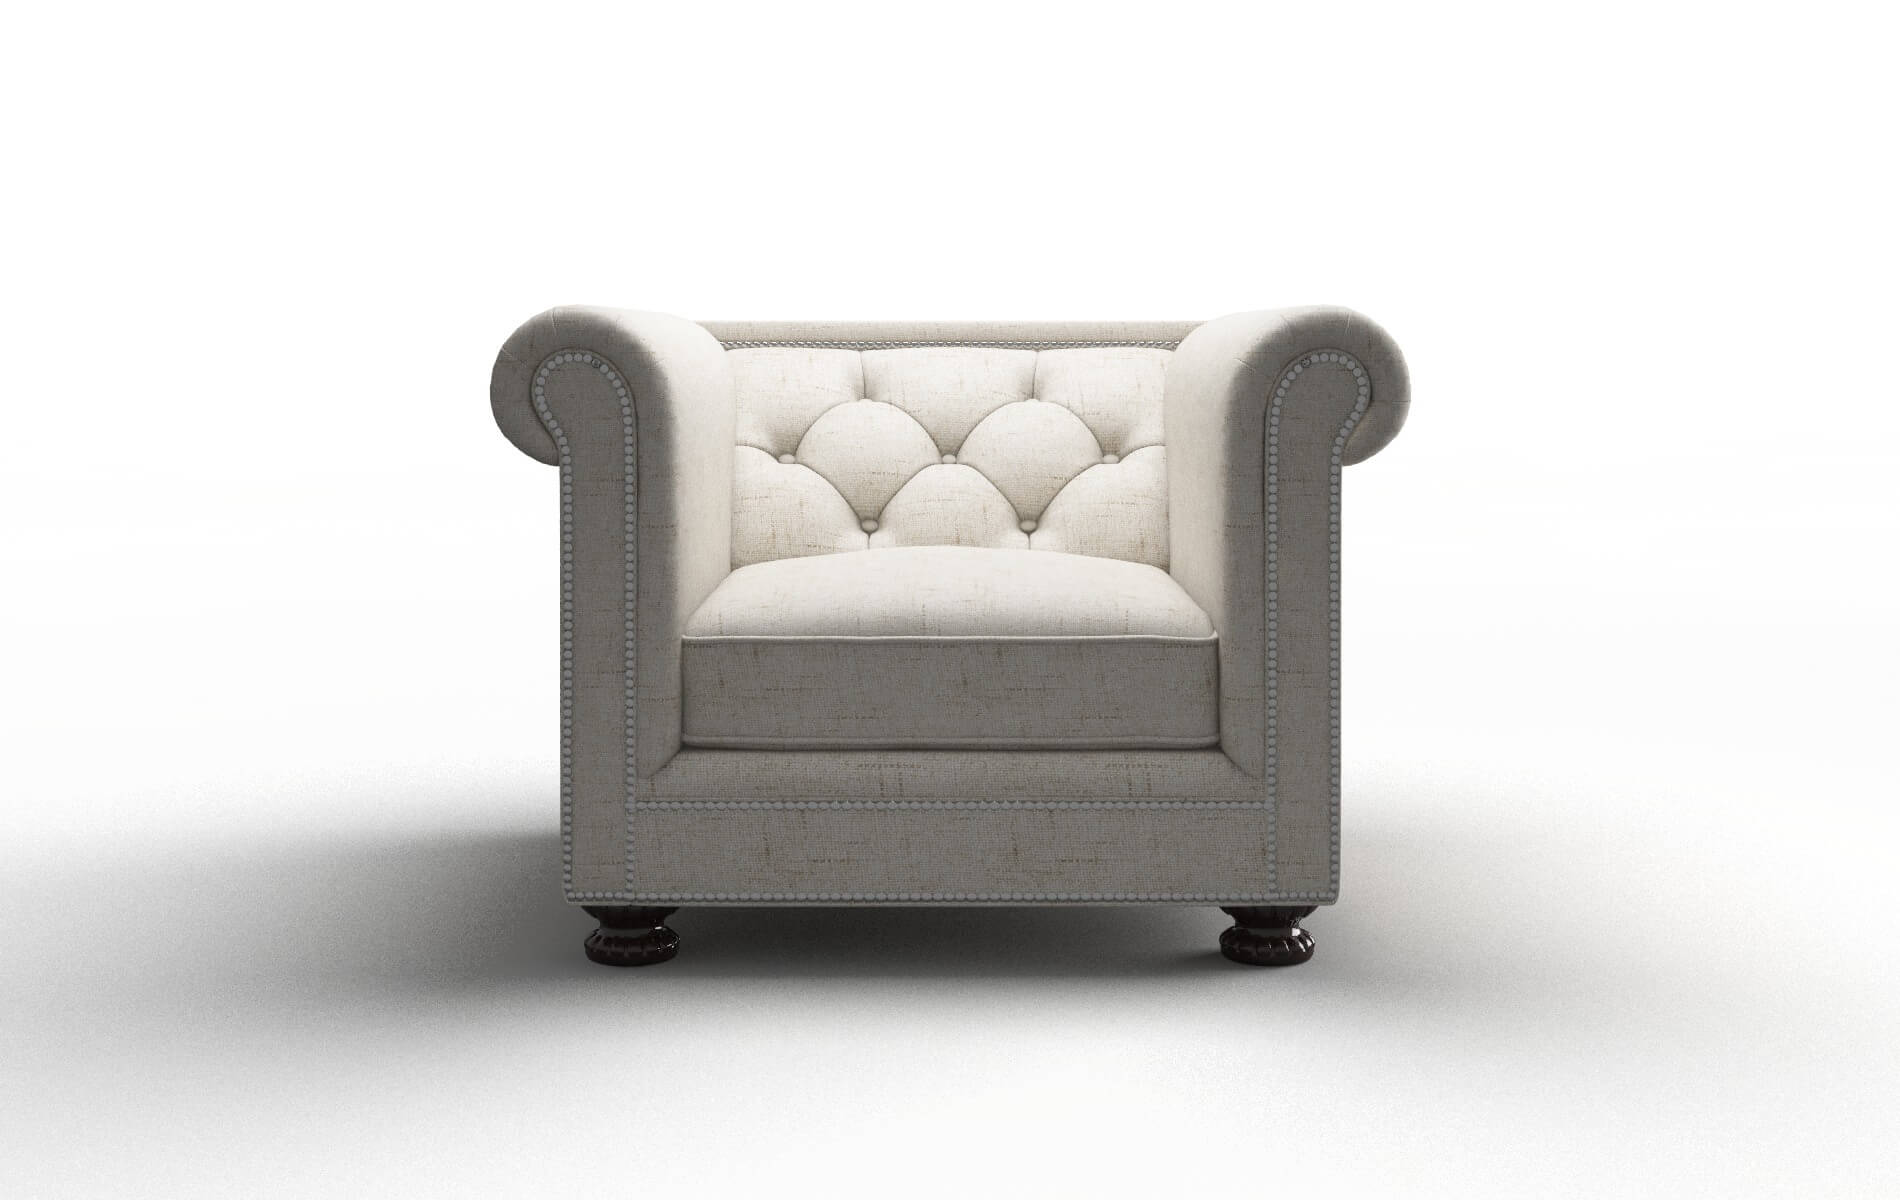 Athens Derby Taupe chair espresso legs